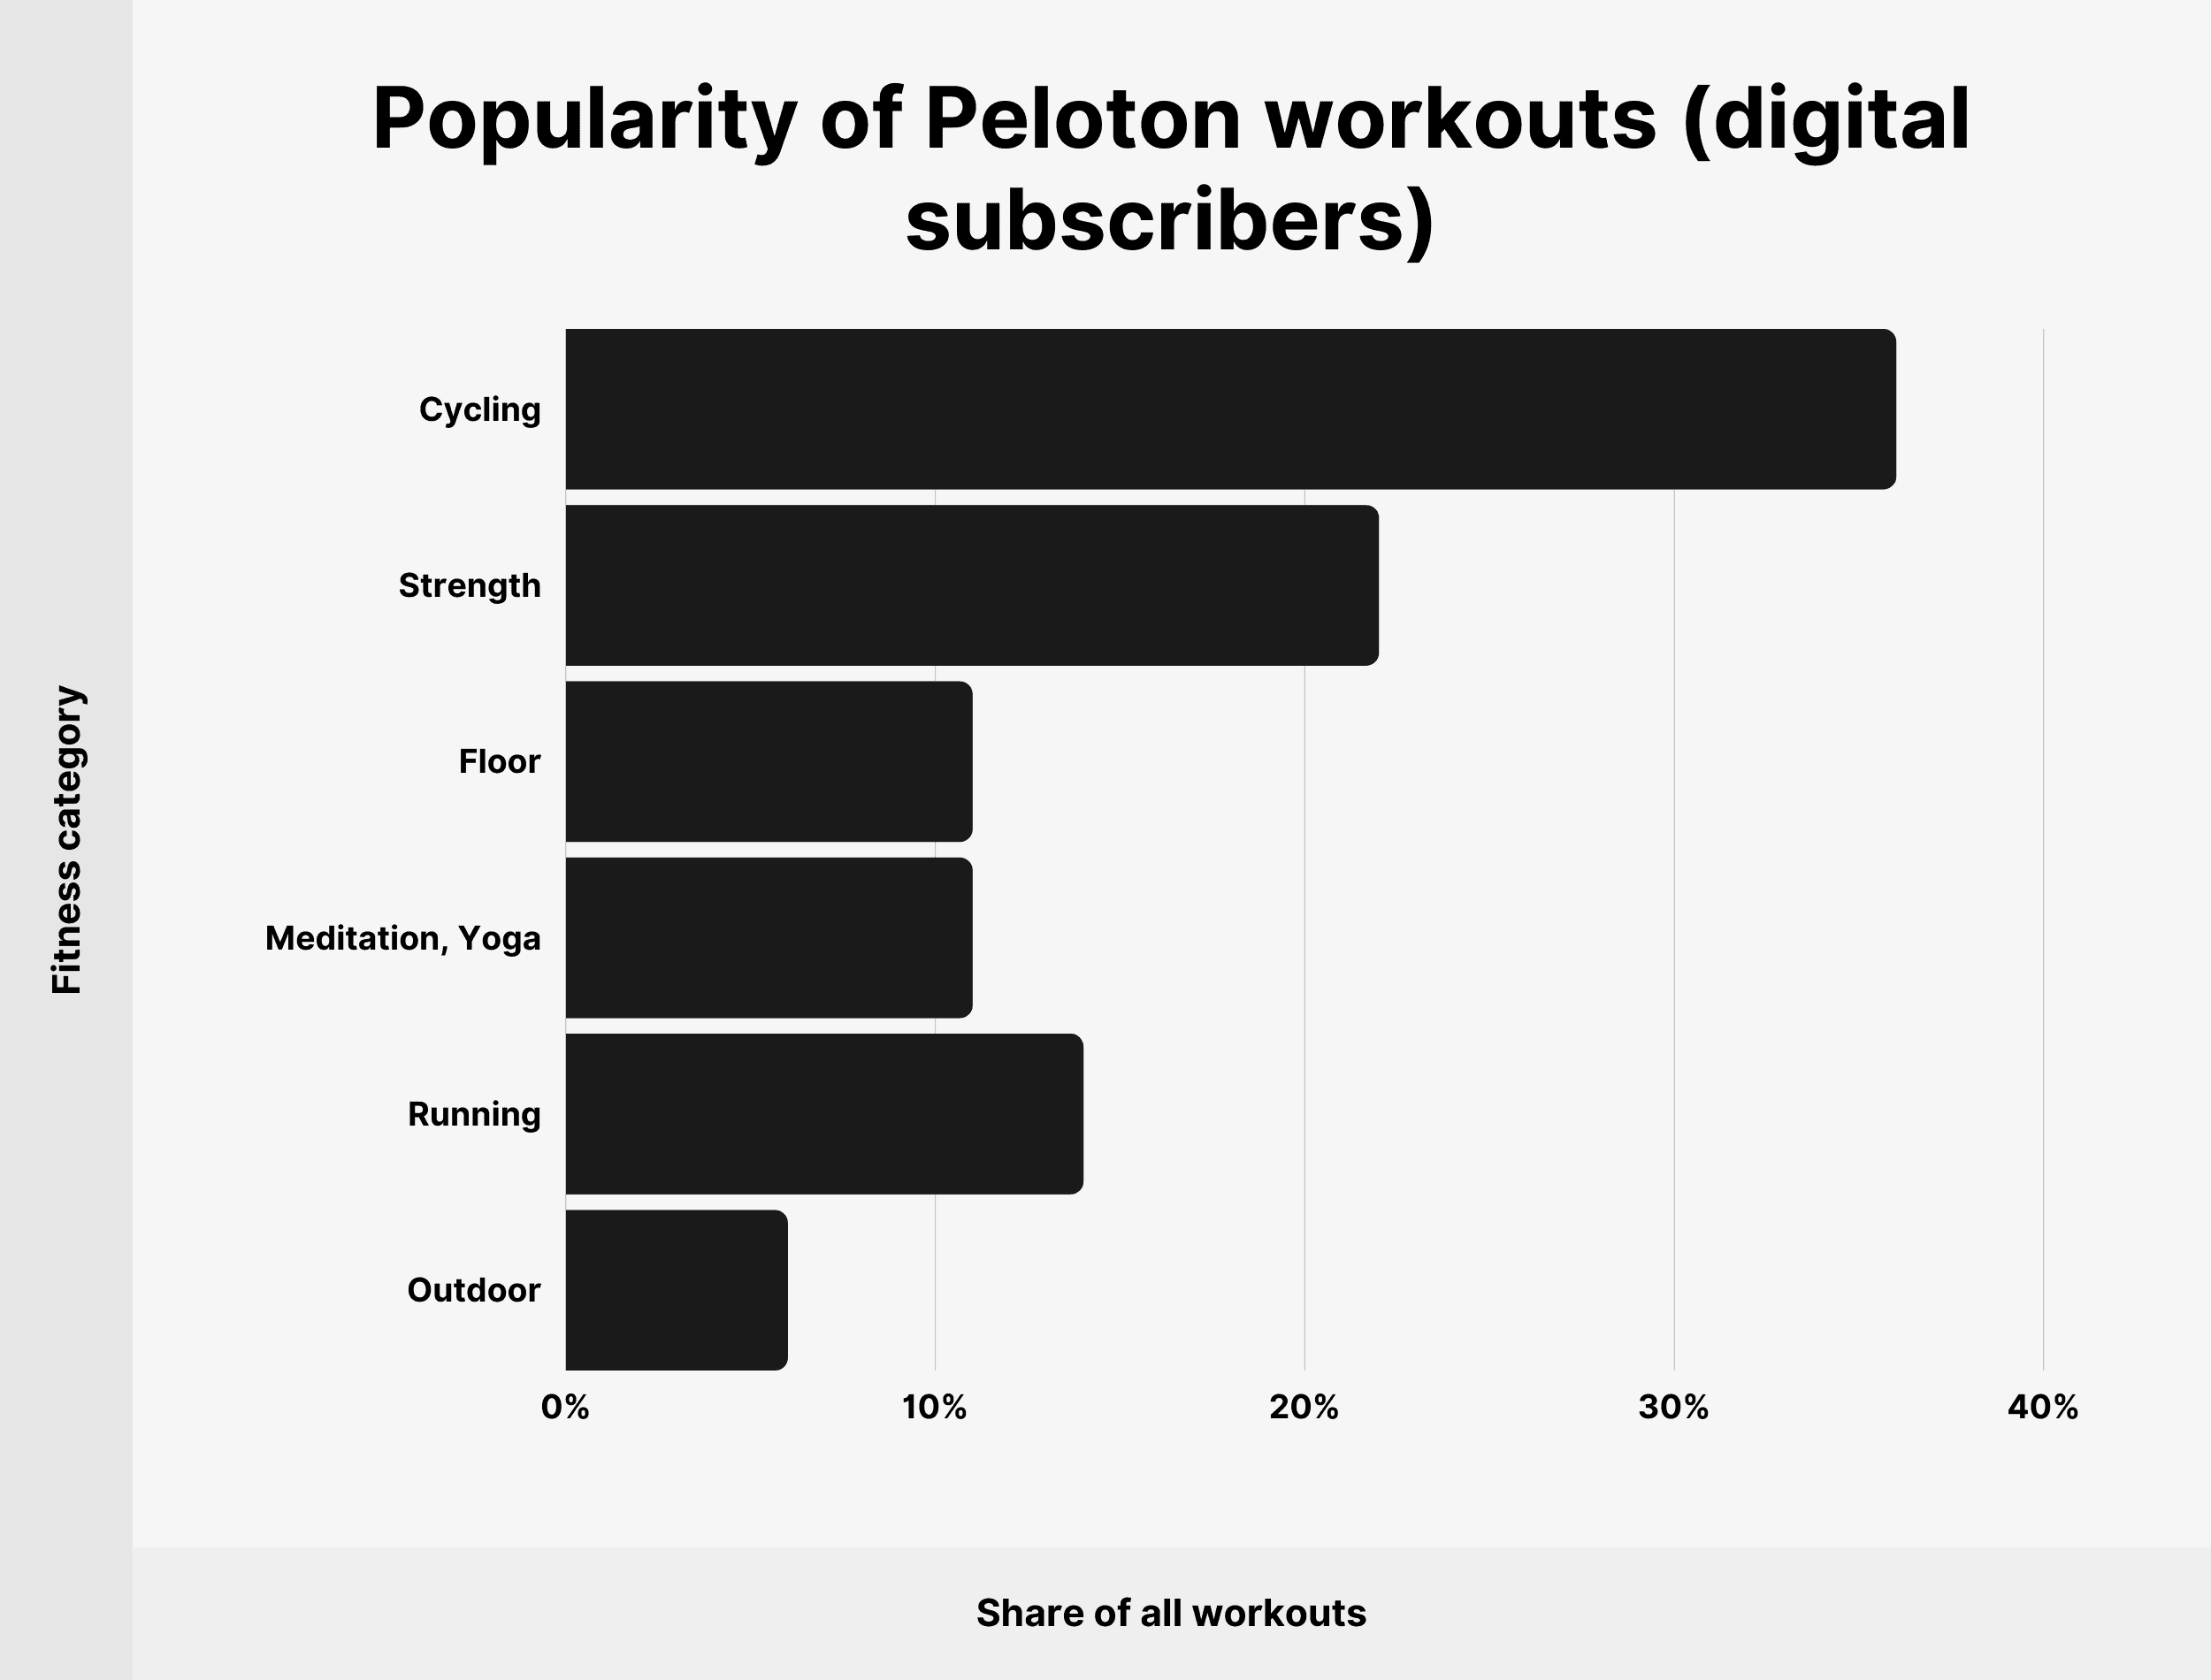 Popularity of Peloton workouts (digital subscribers)